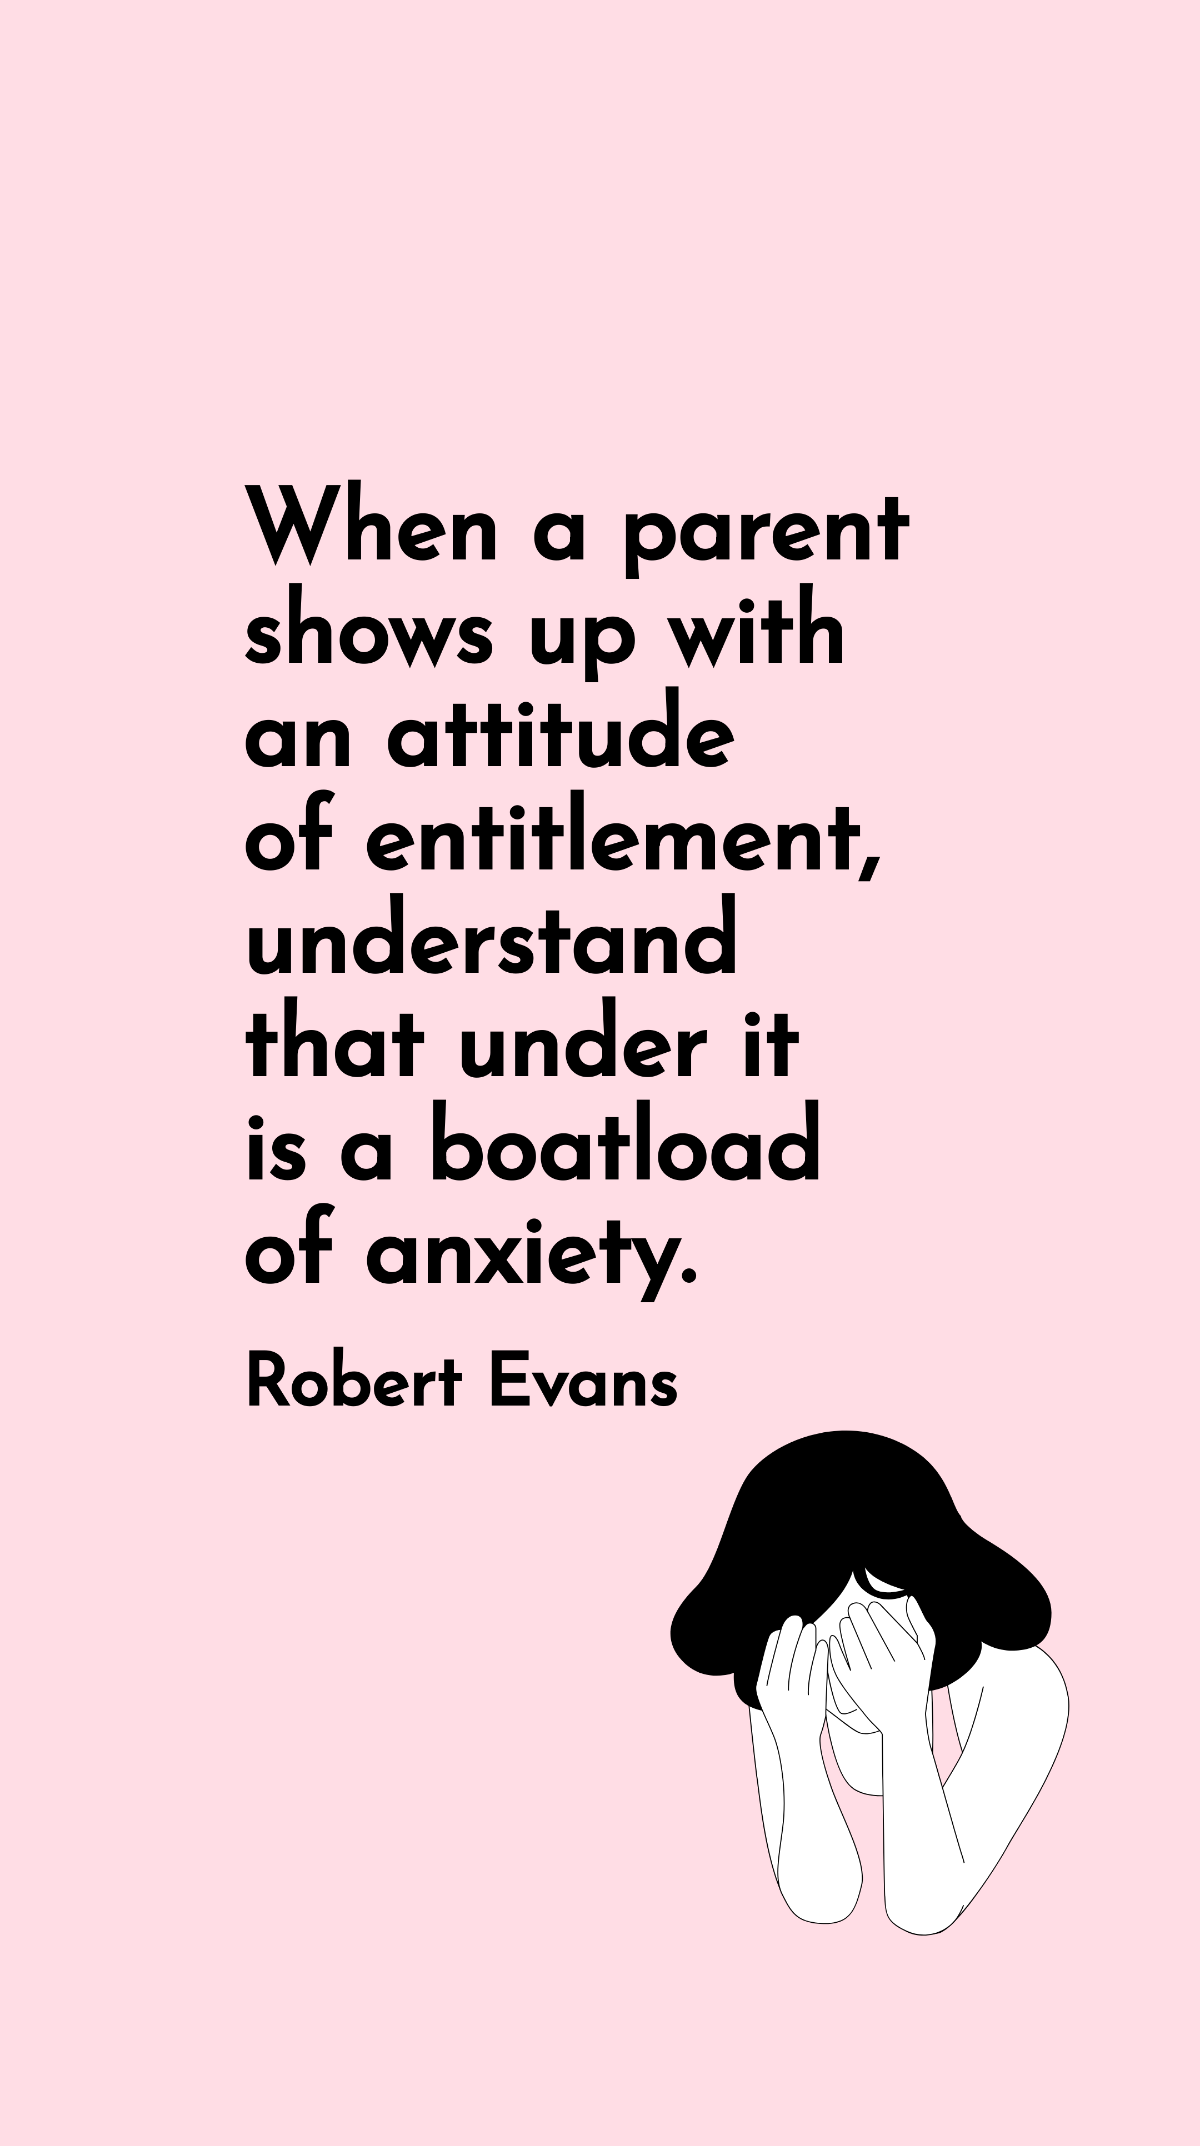 Robert Evans - When a parent shows up with an attitude of entitlement, understand that under it is a boatload of anxiety.